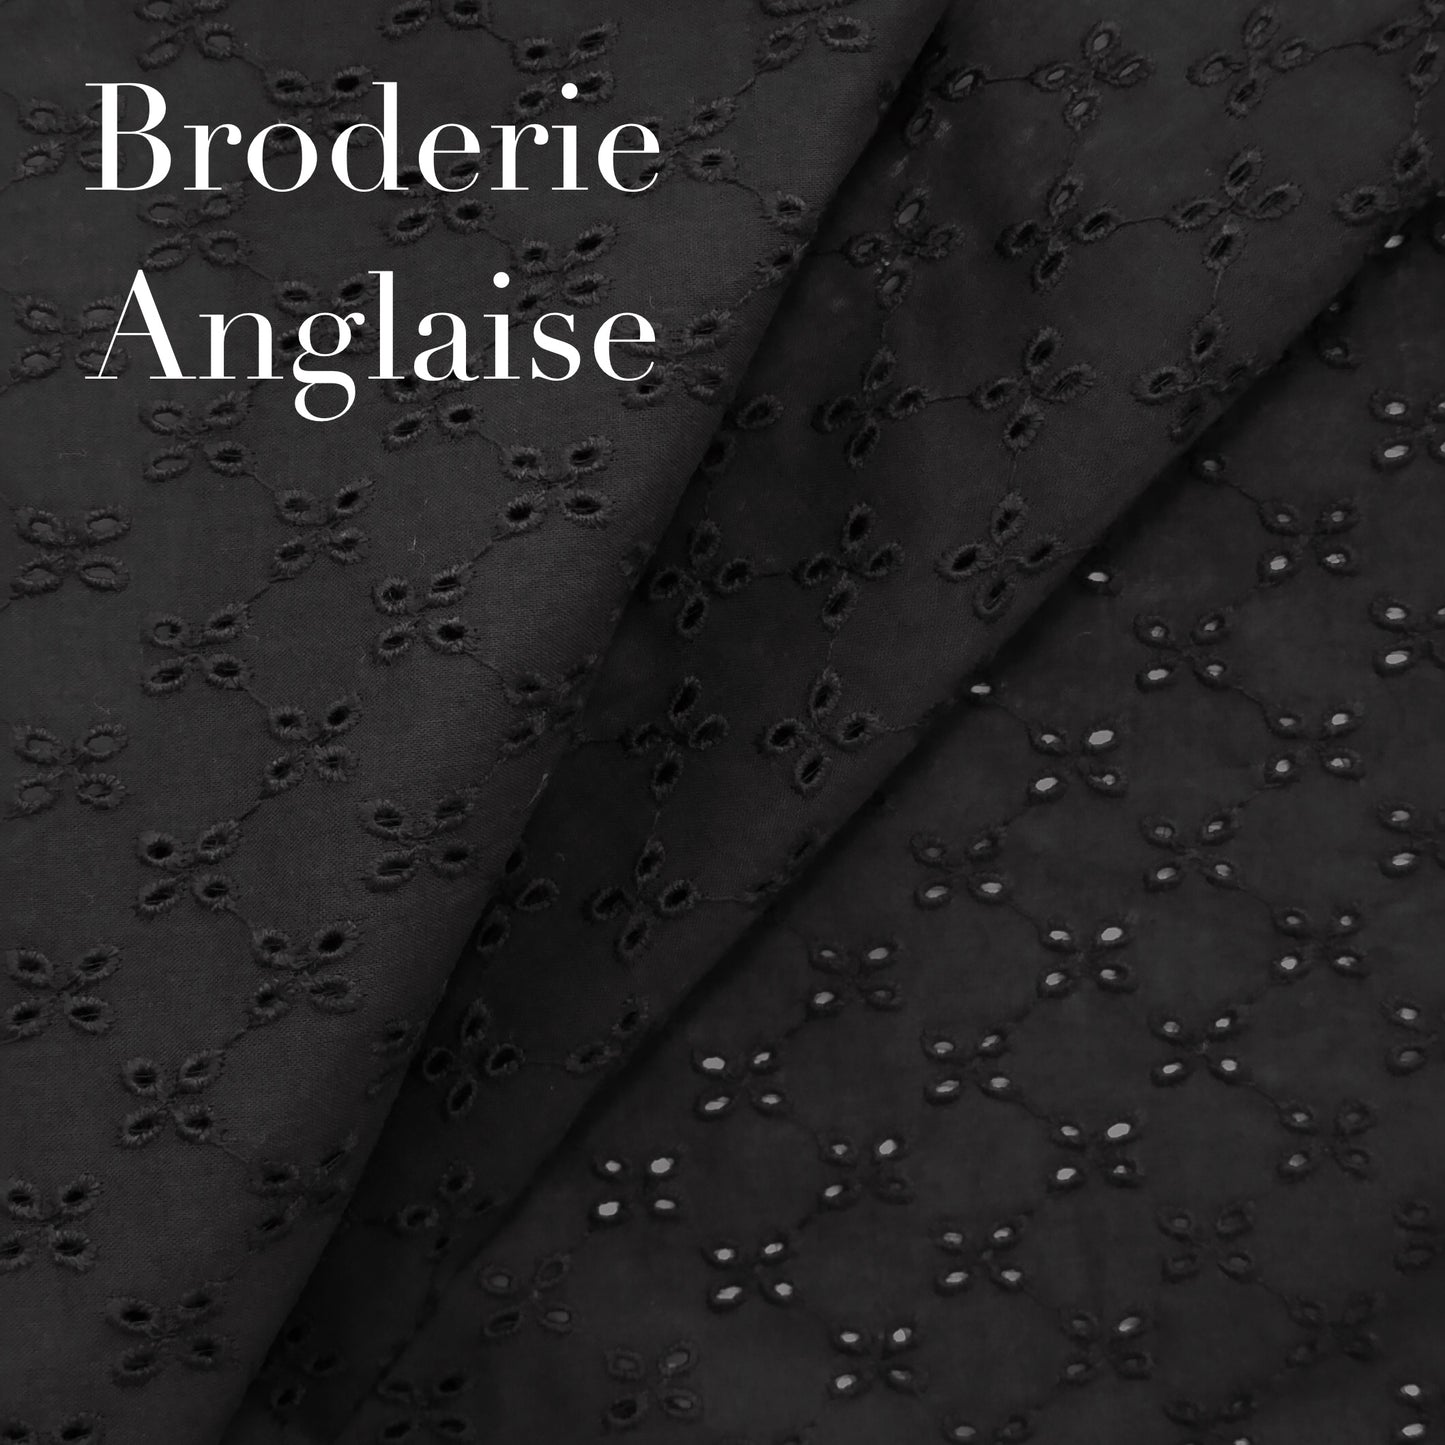 Midnight Black Broderie Anglaise nursing cover